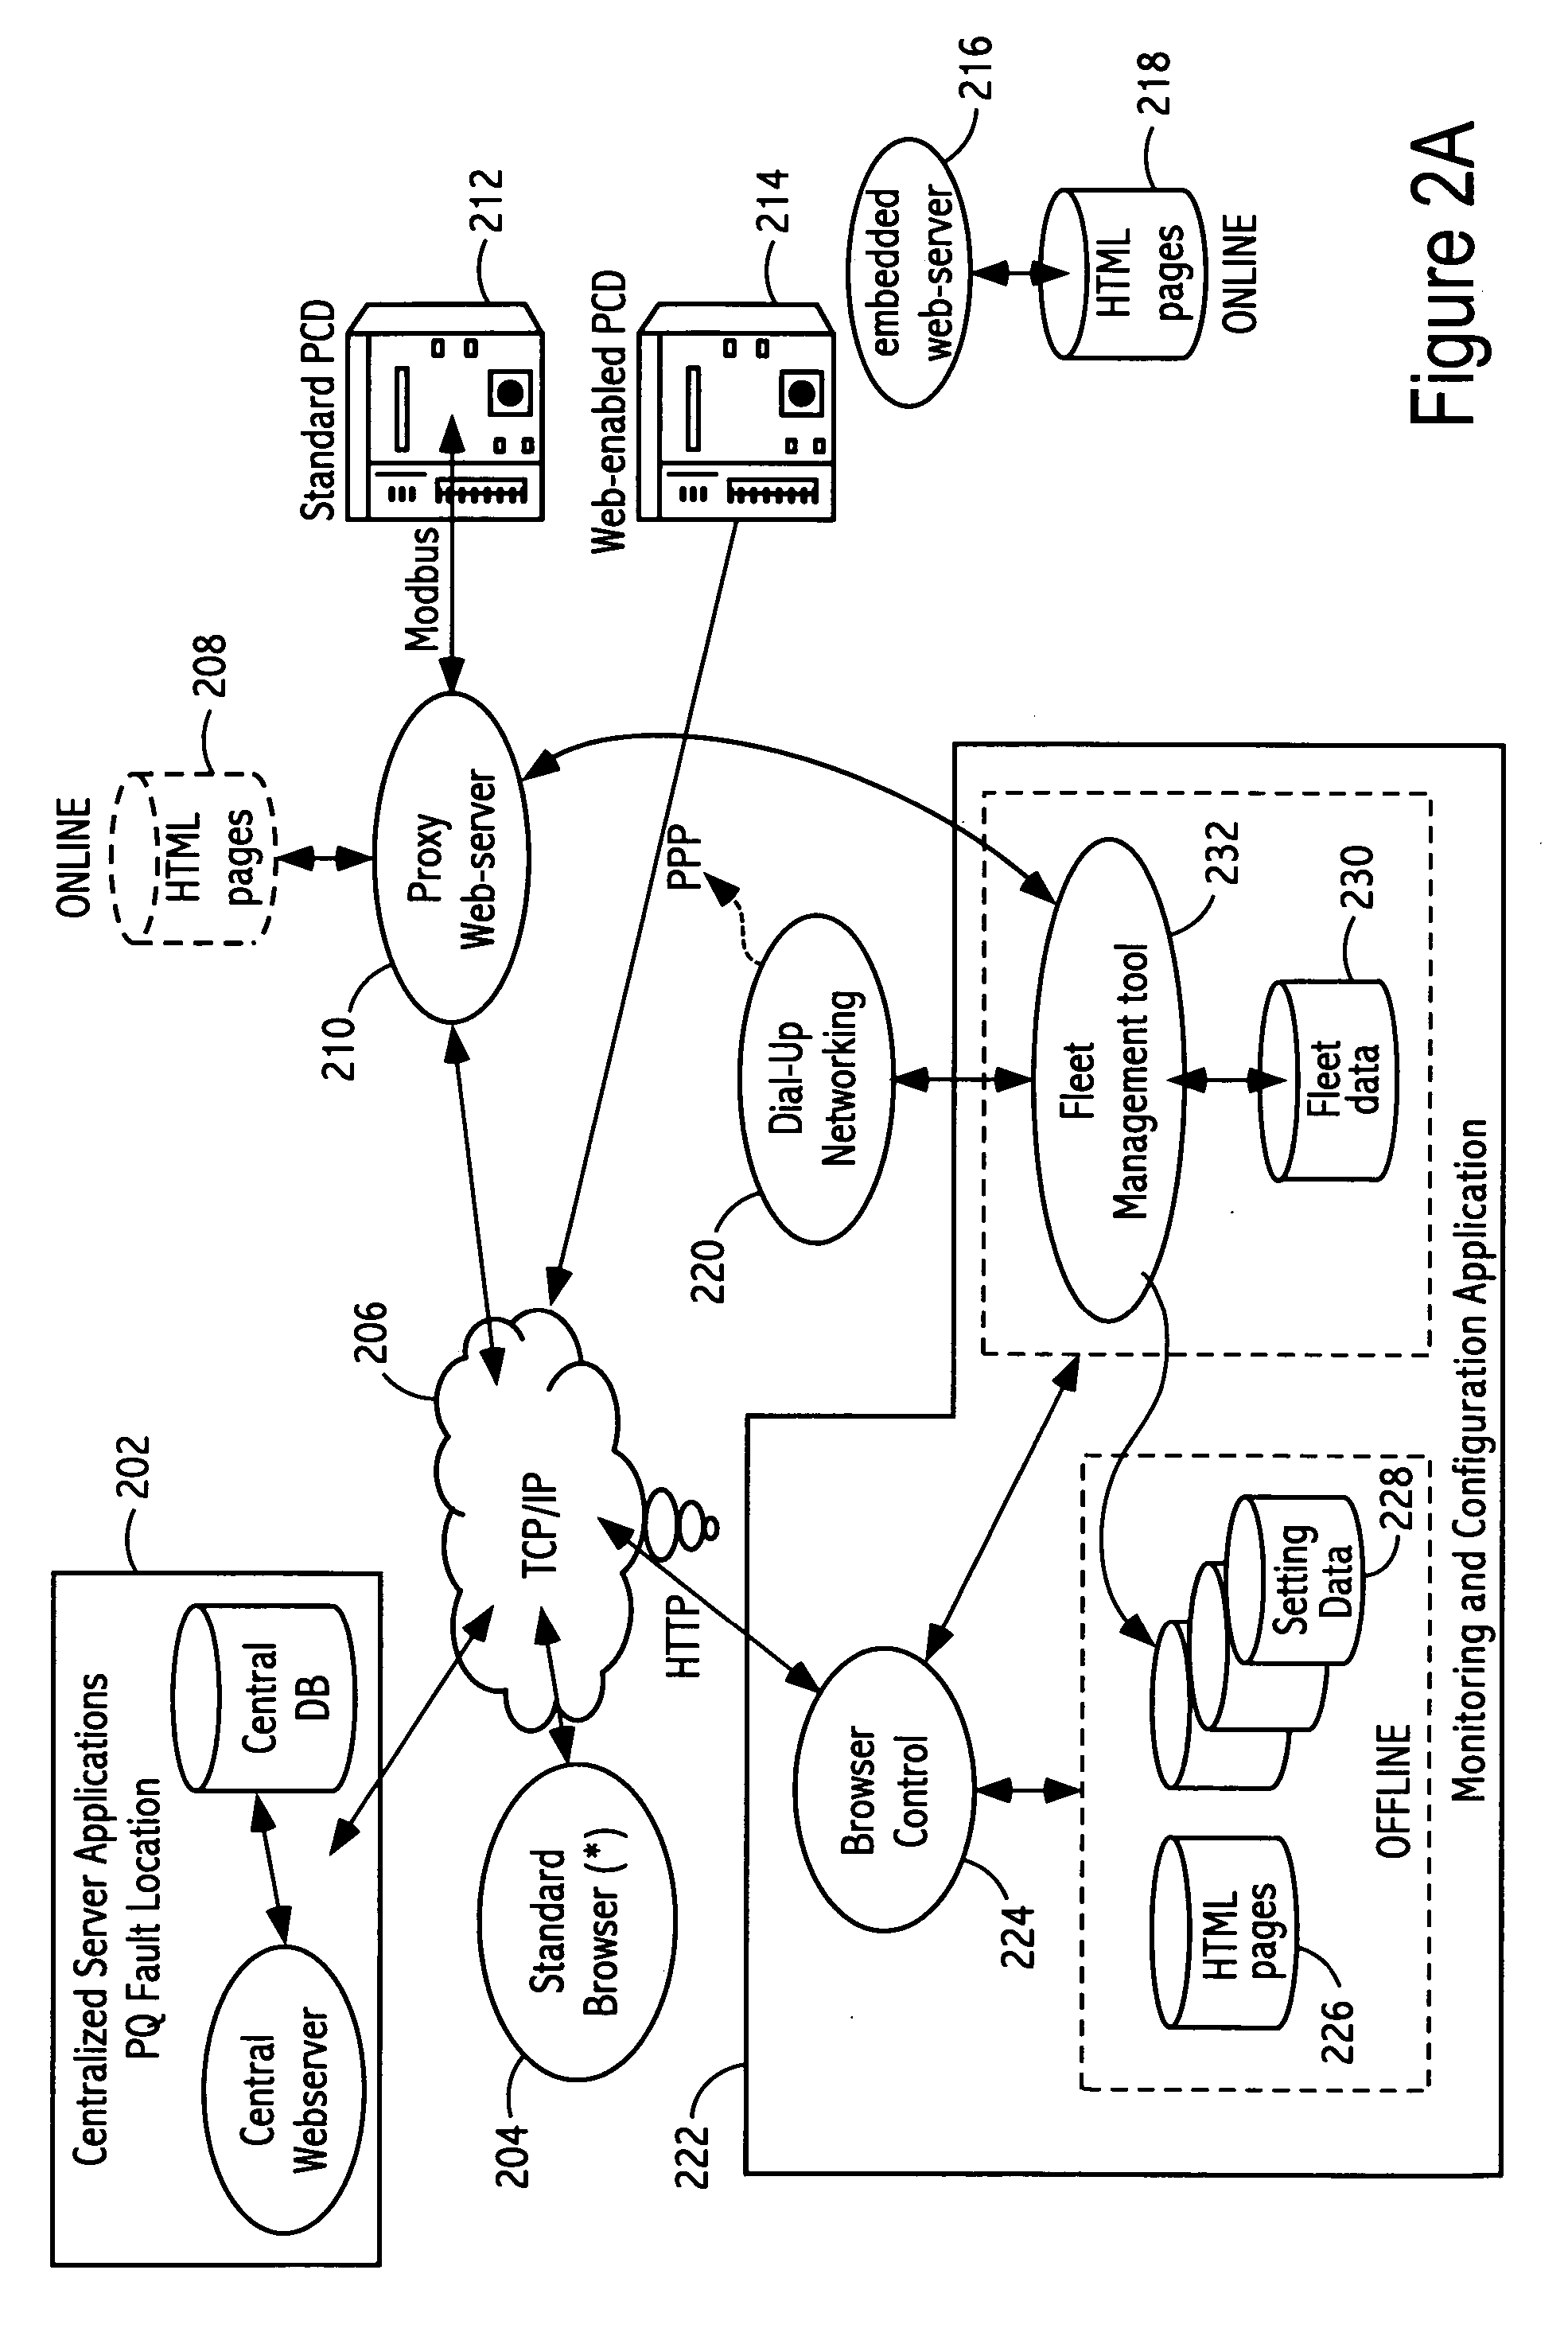 Intelligent configuration system for power distribution feeder reclosers and switches